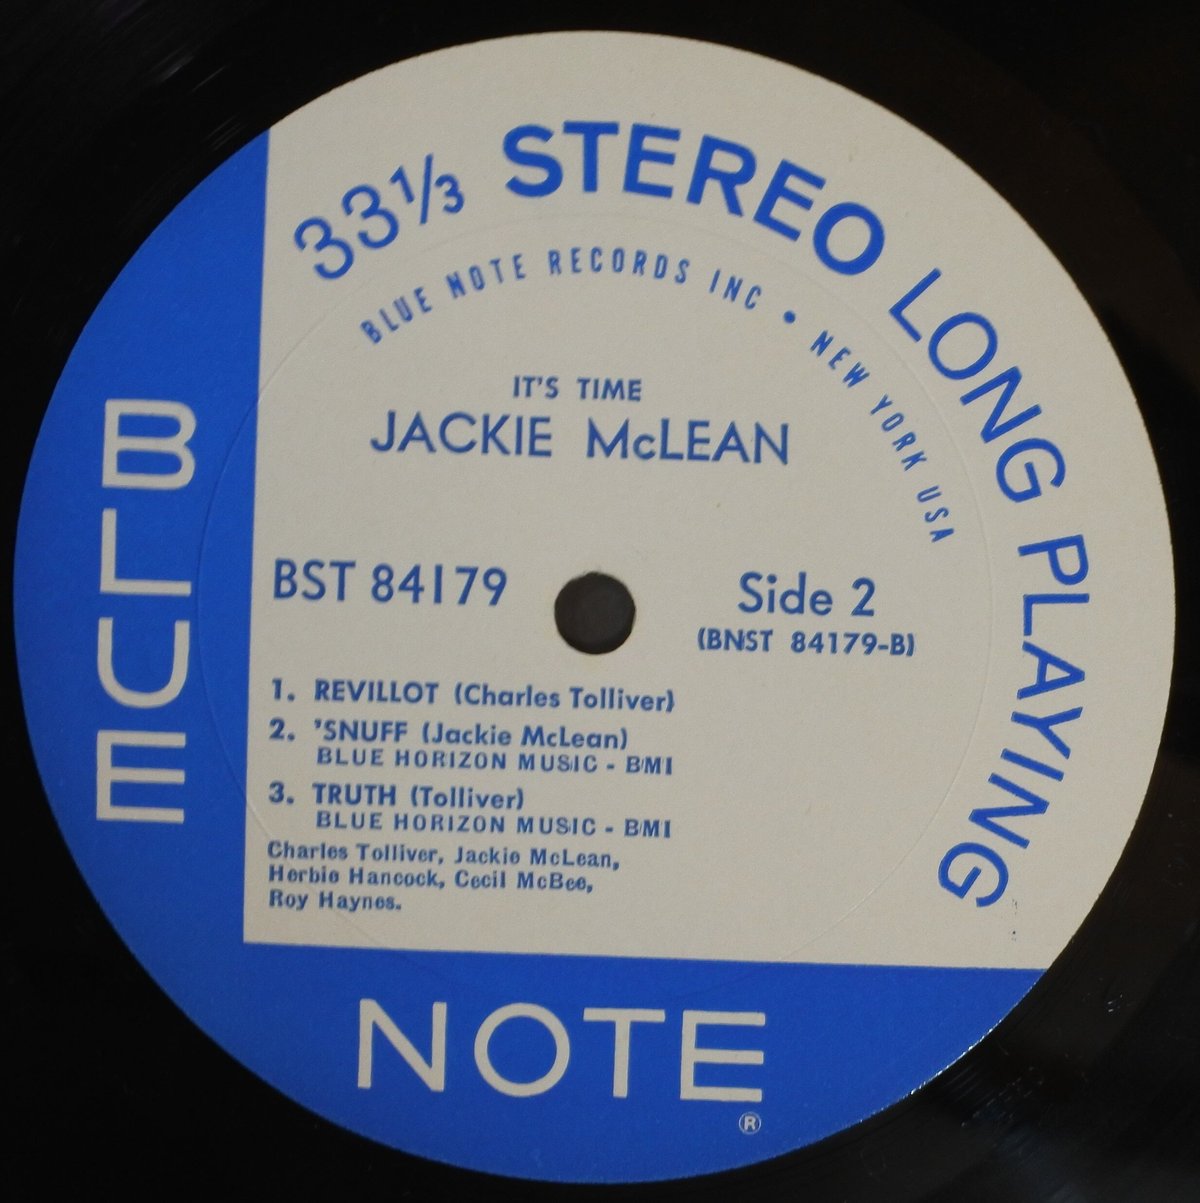 RIGHT NOW! / JACKIE McLEAN ブルーノート　US盤